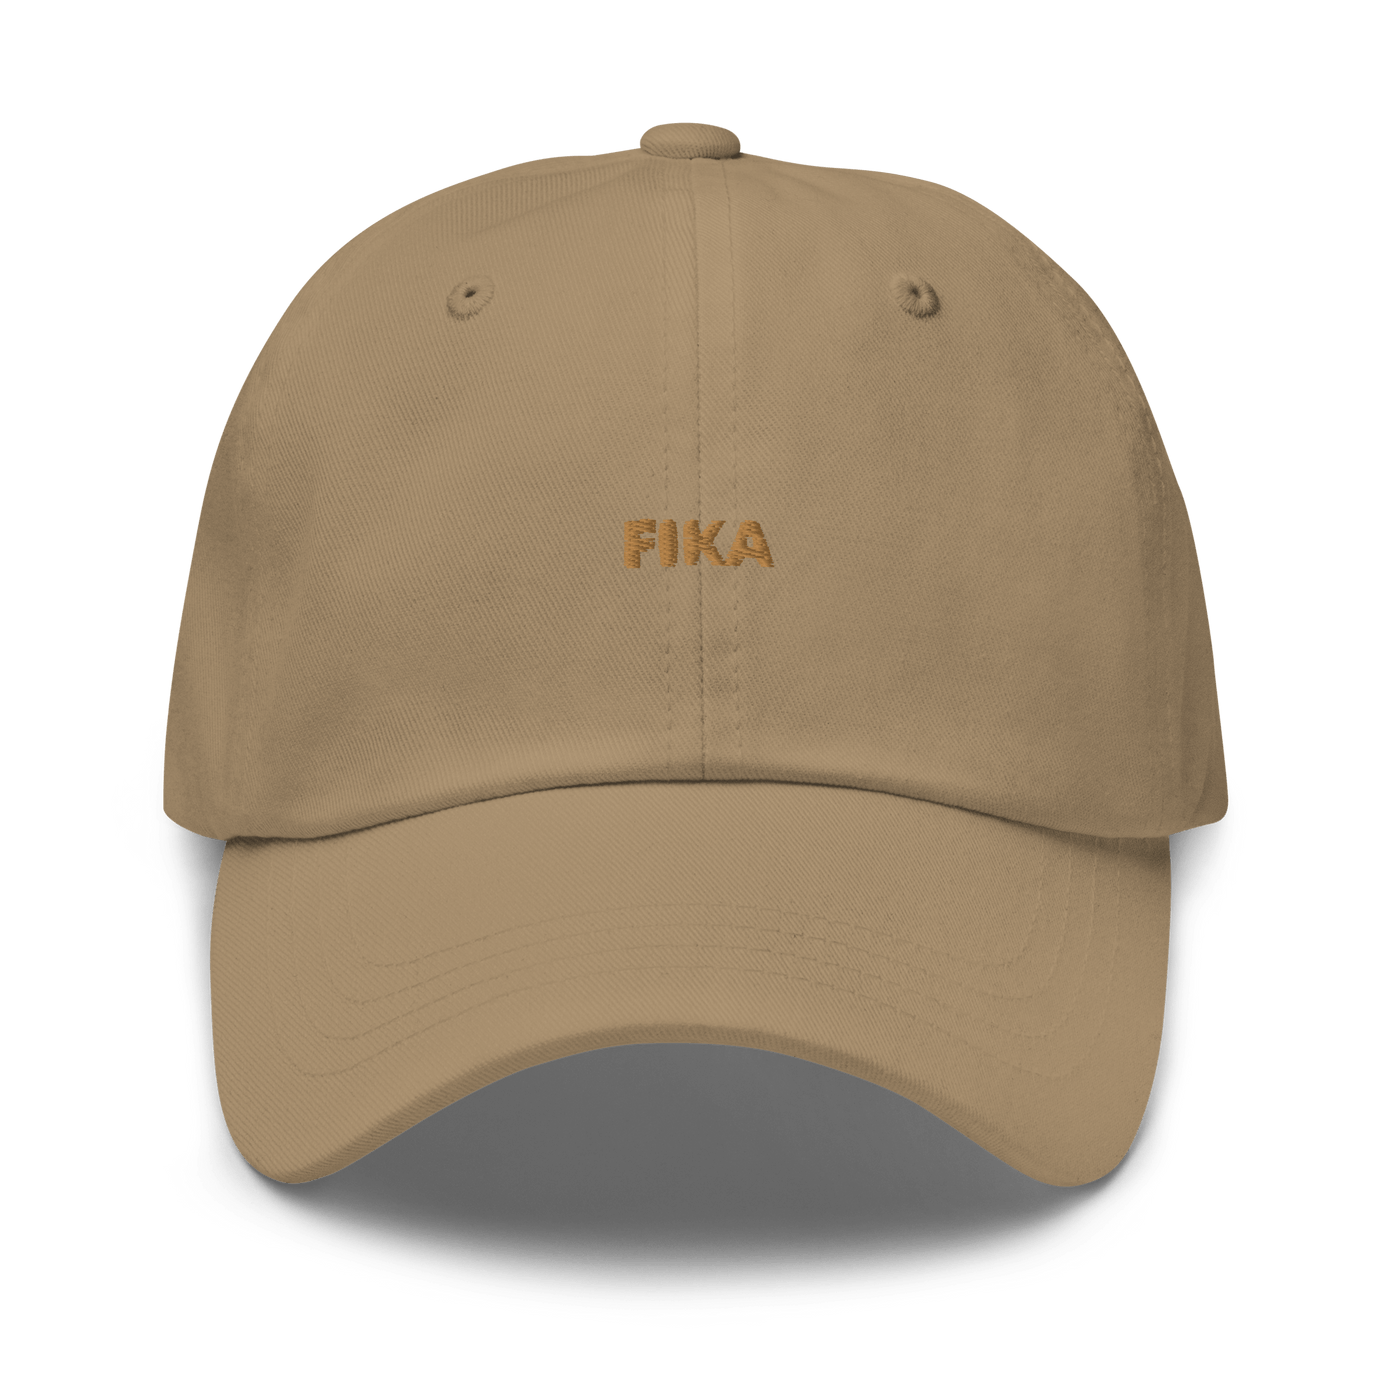 FIKA Dad hat - Navy - - Just Another Cap Store